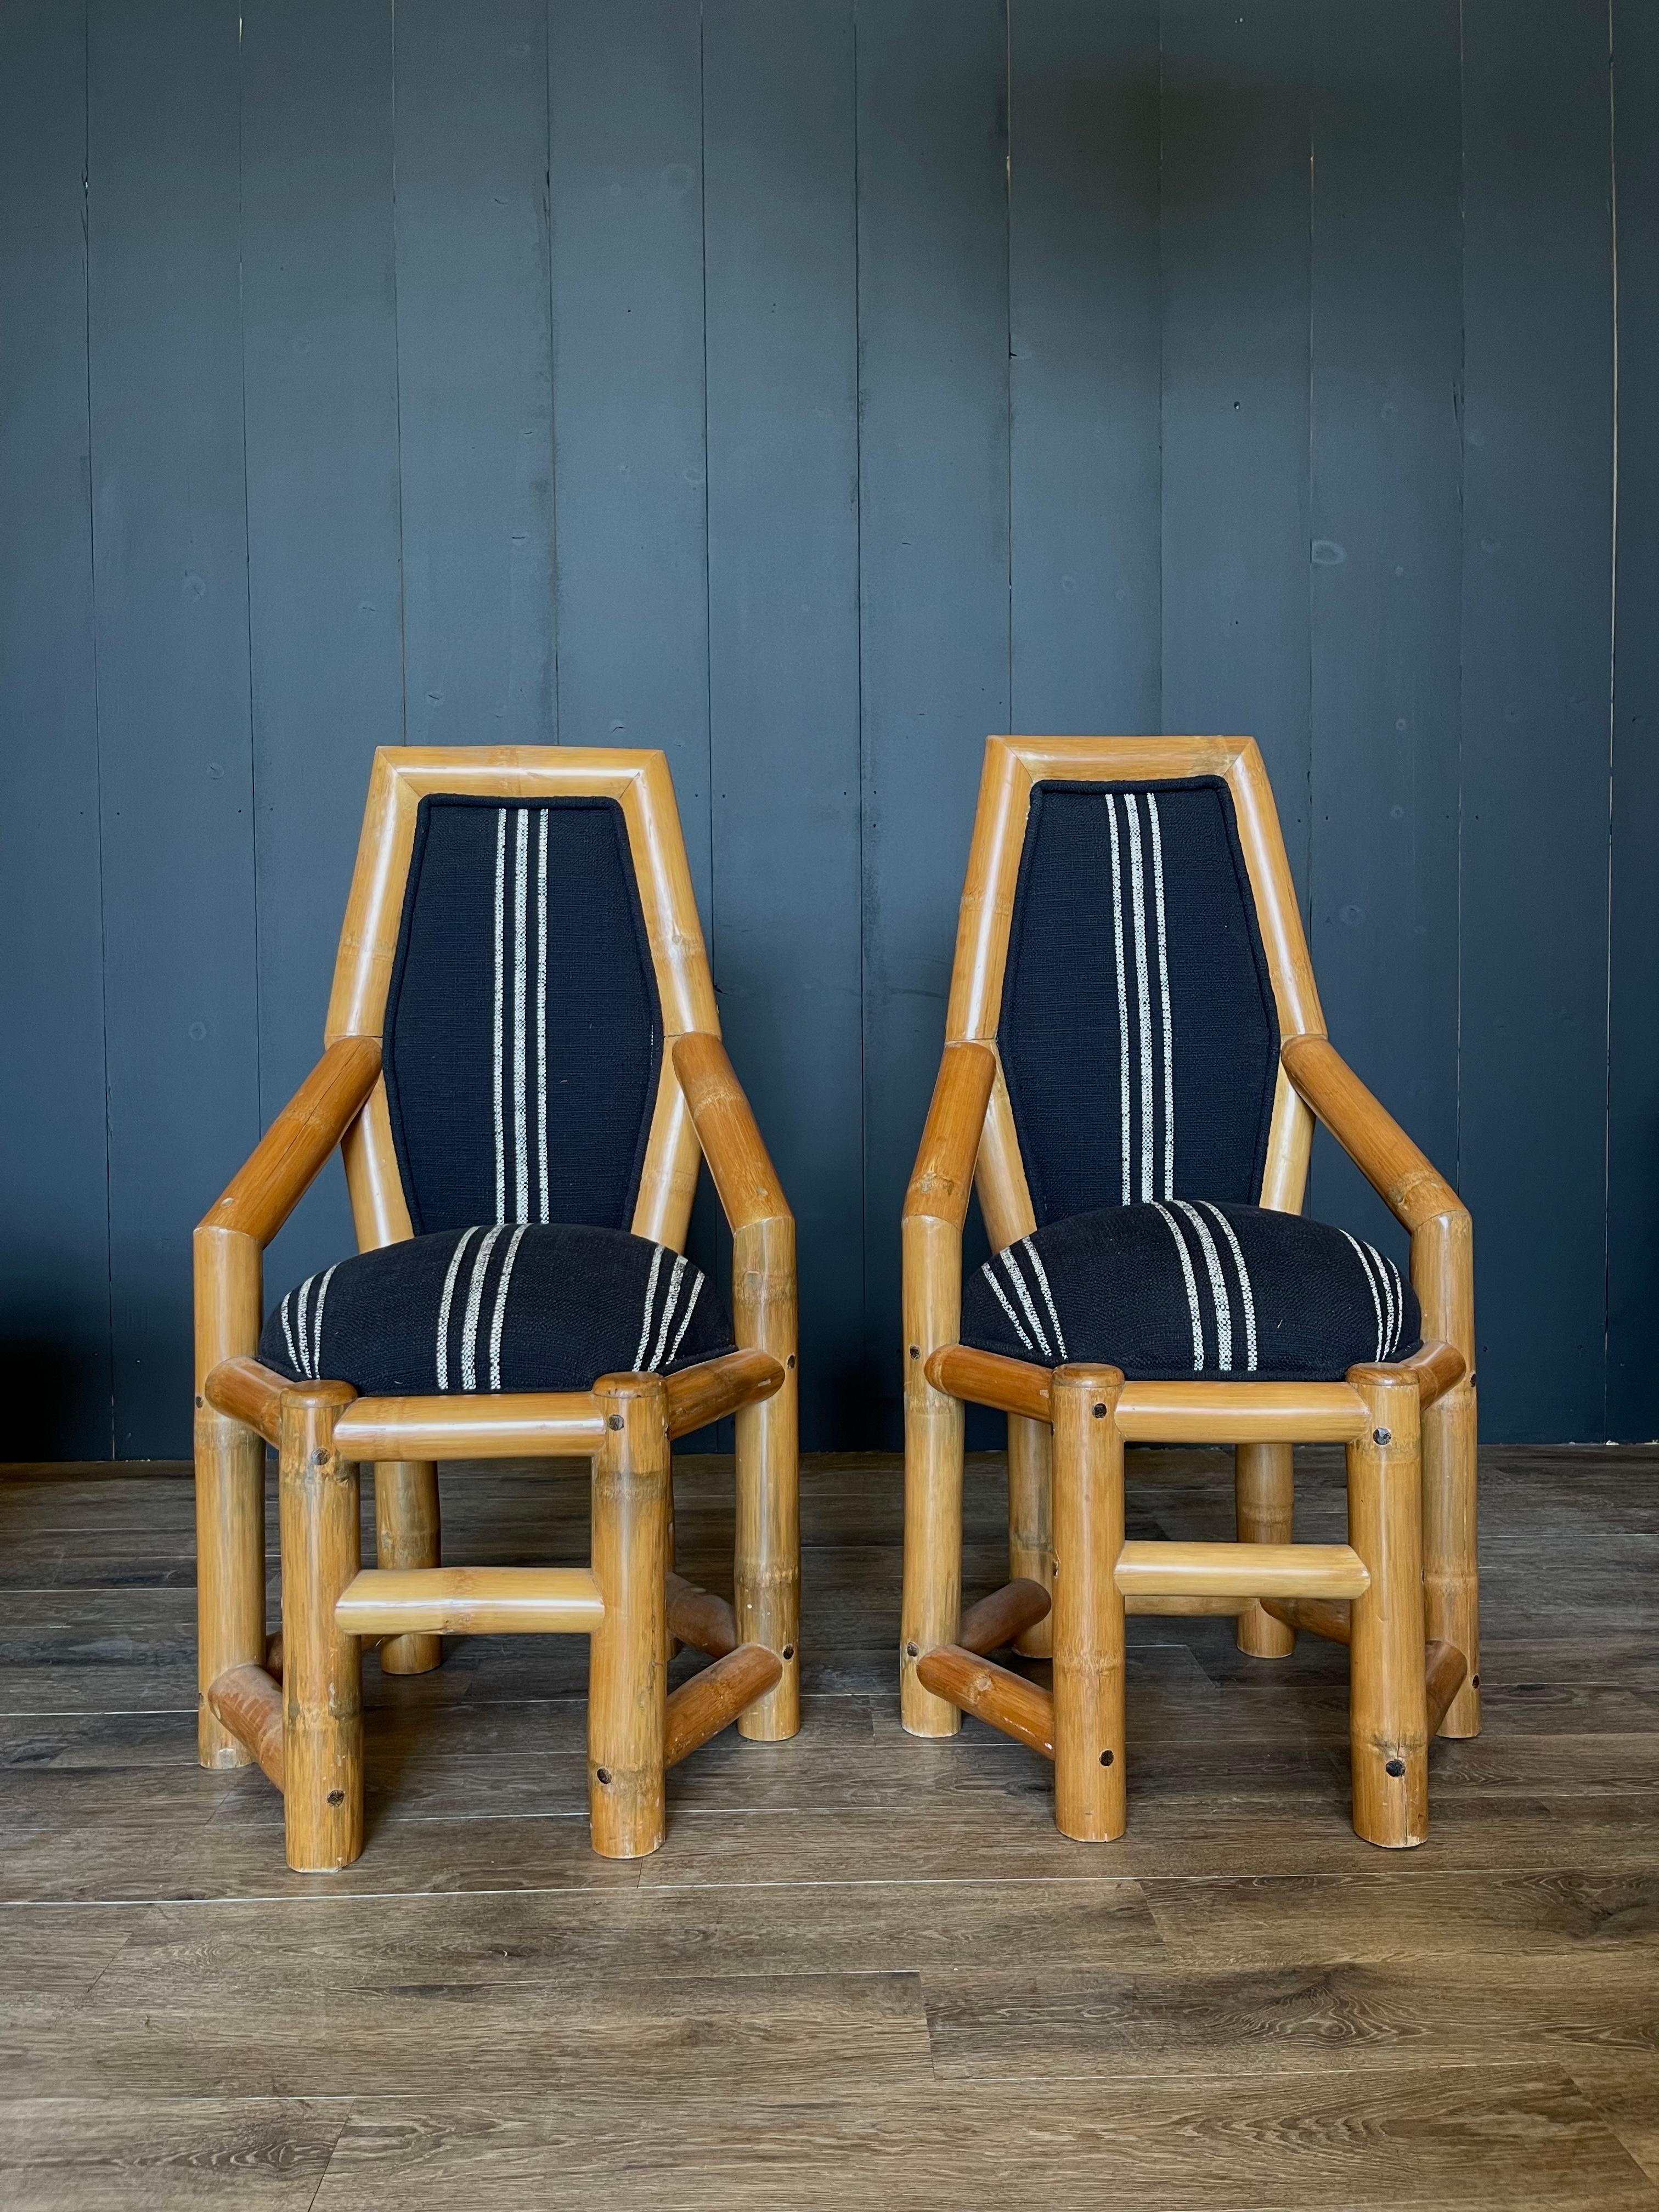 3 pairs available…Transform your space with this delightful pair of vintage bamboo accent chairs featuring a chic black and white striped fabric. Crafted with timeless charm, these chairs effortlessly blend classic bamboo craftsmanship with a